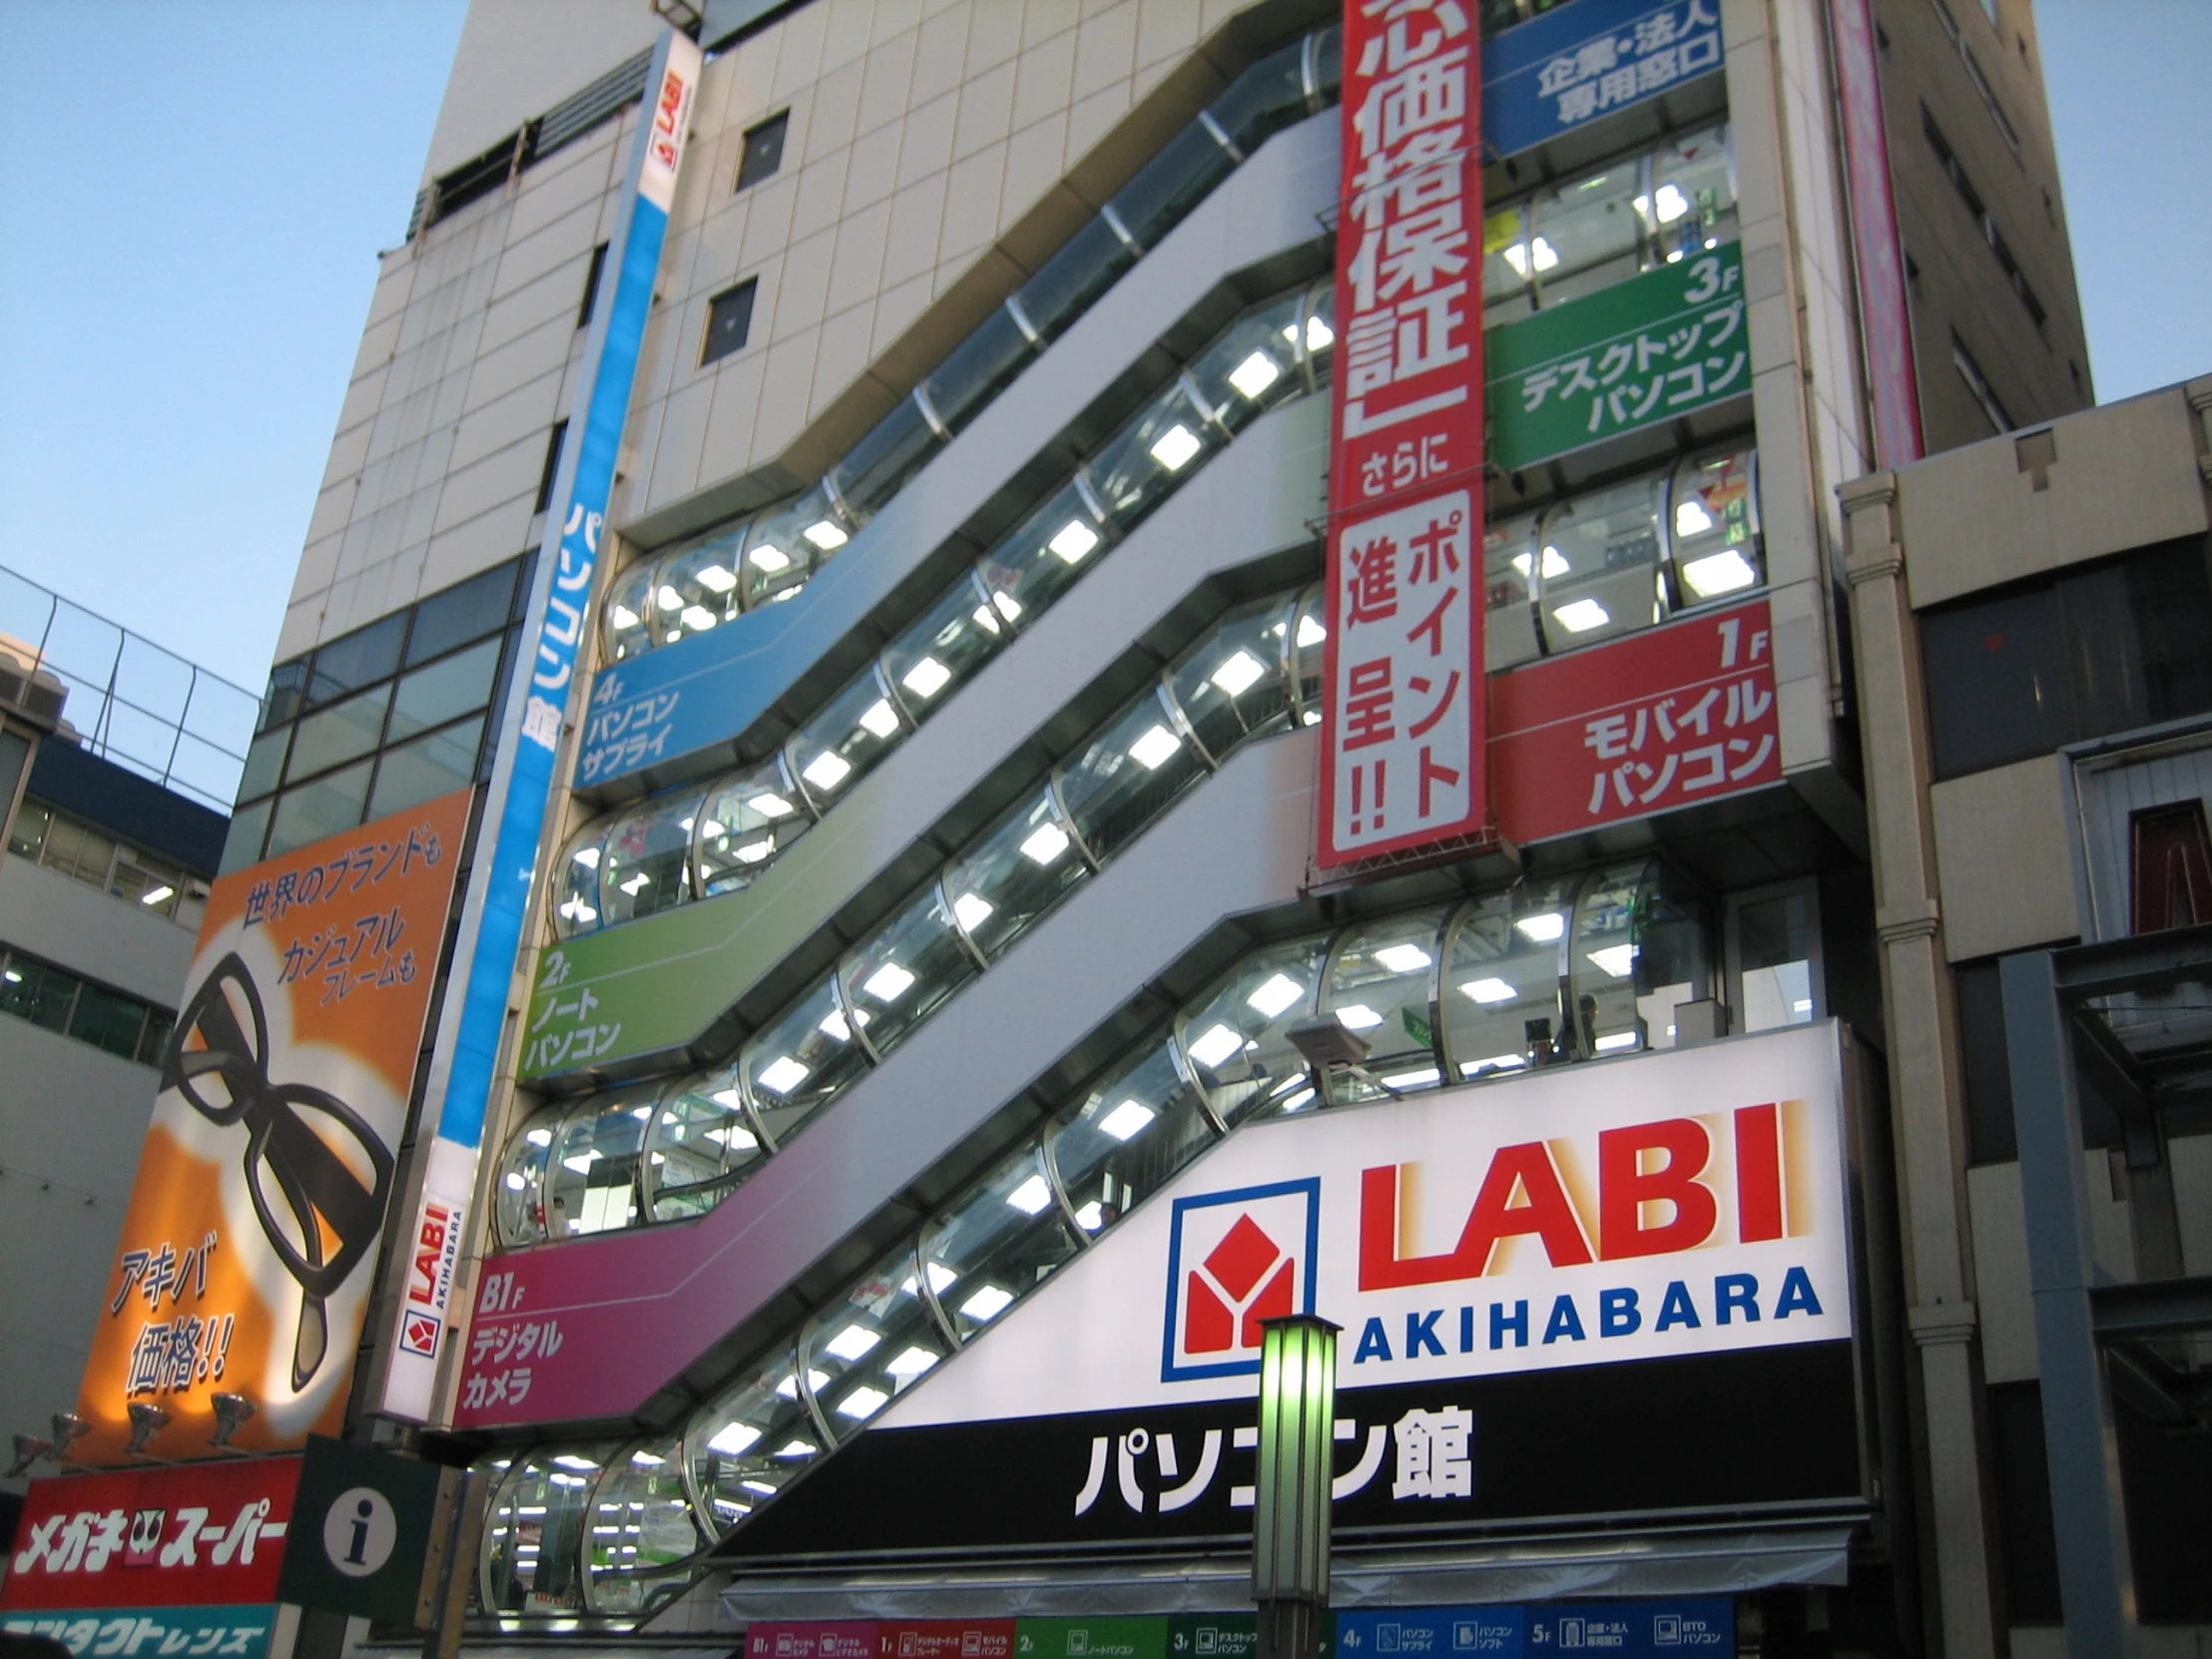 some buildings that have various business signs on them